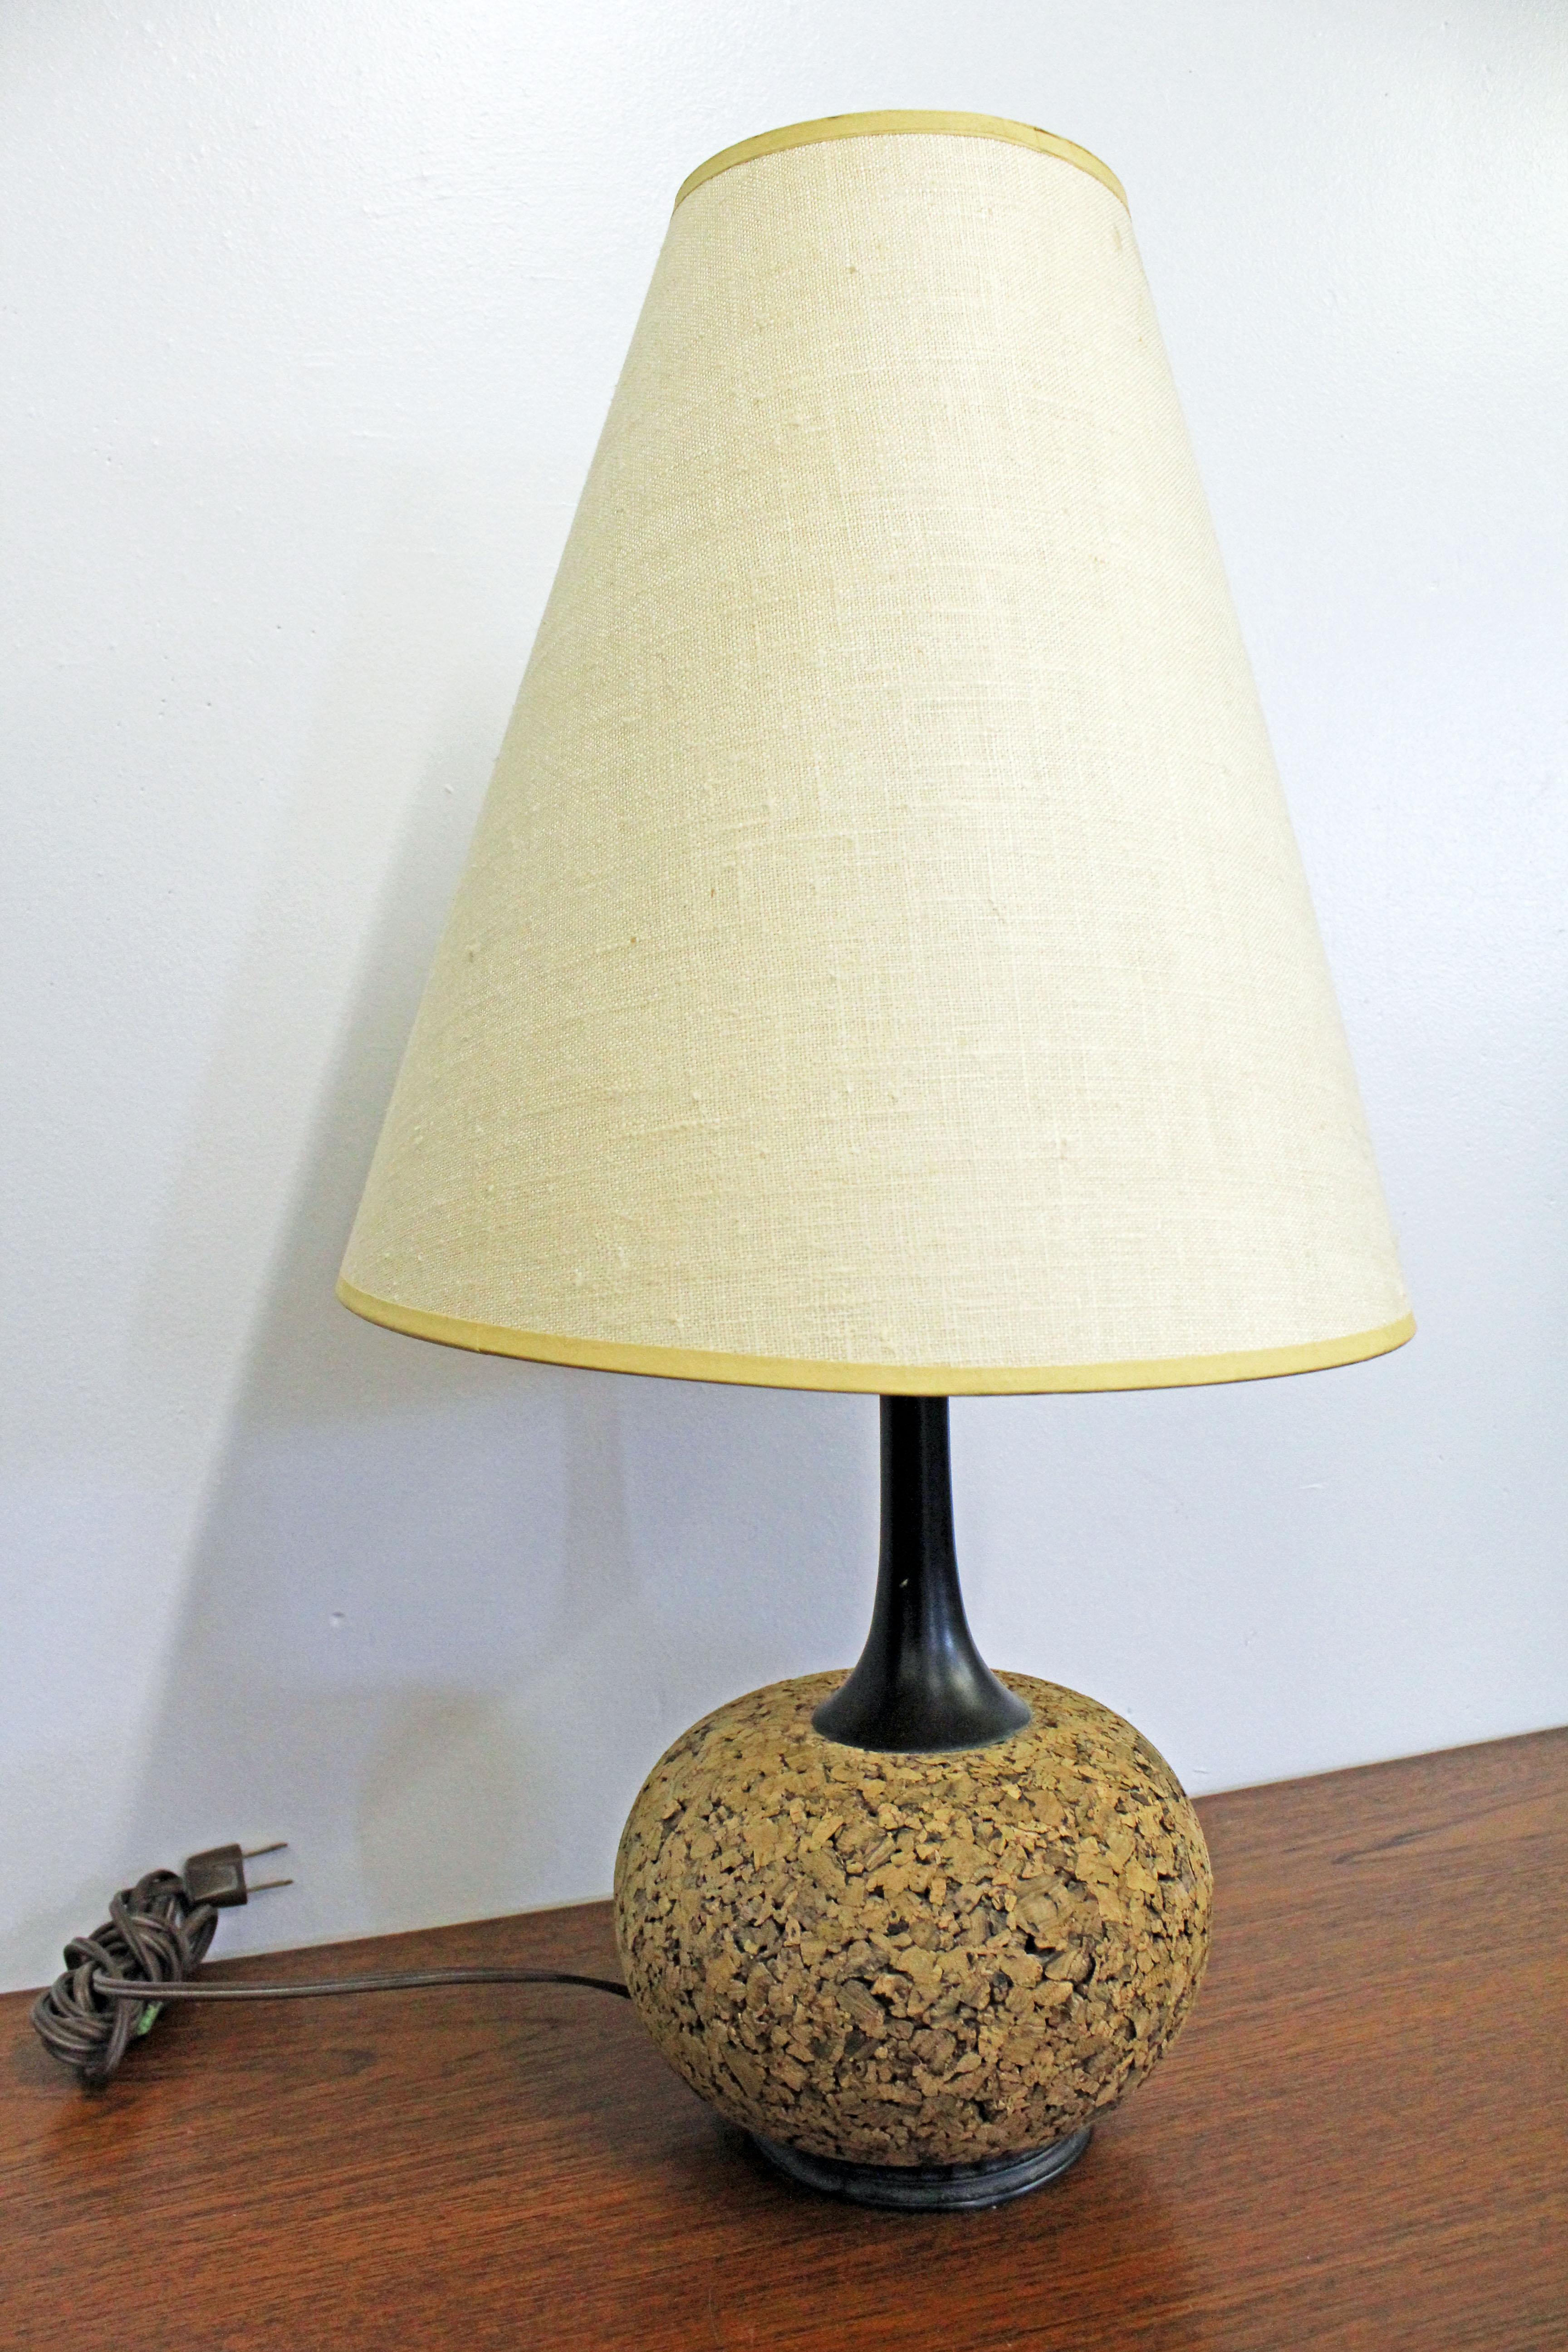 Offered is a Mid-Century Modern table lamp with a cork and metal base. It is in good, working condition showing slight age wear and small scratch on base. See pics for details. The shade is not included. It is not signed. A great piece to add to any